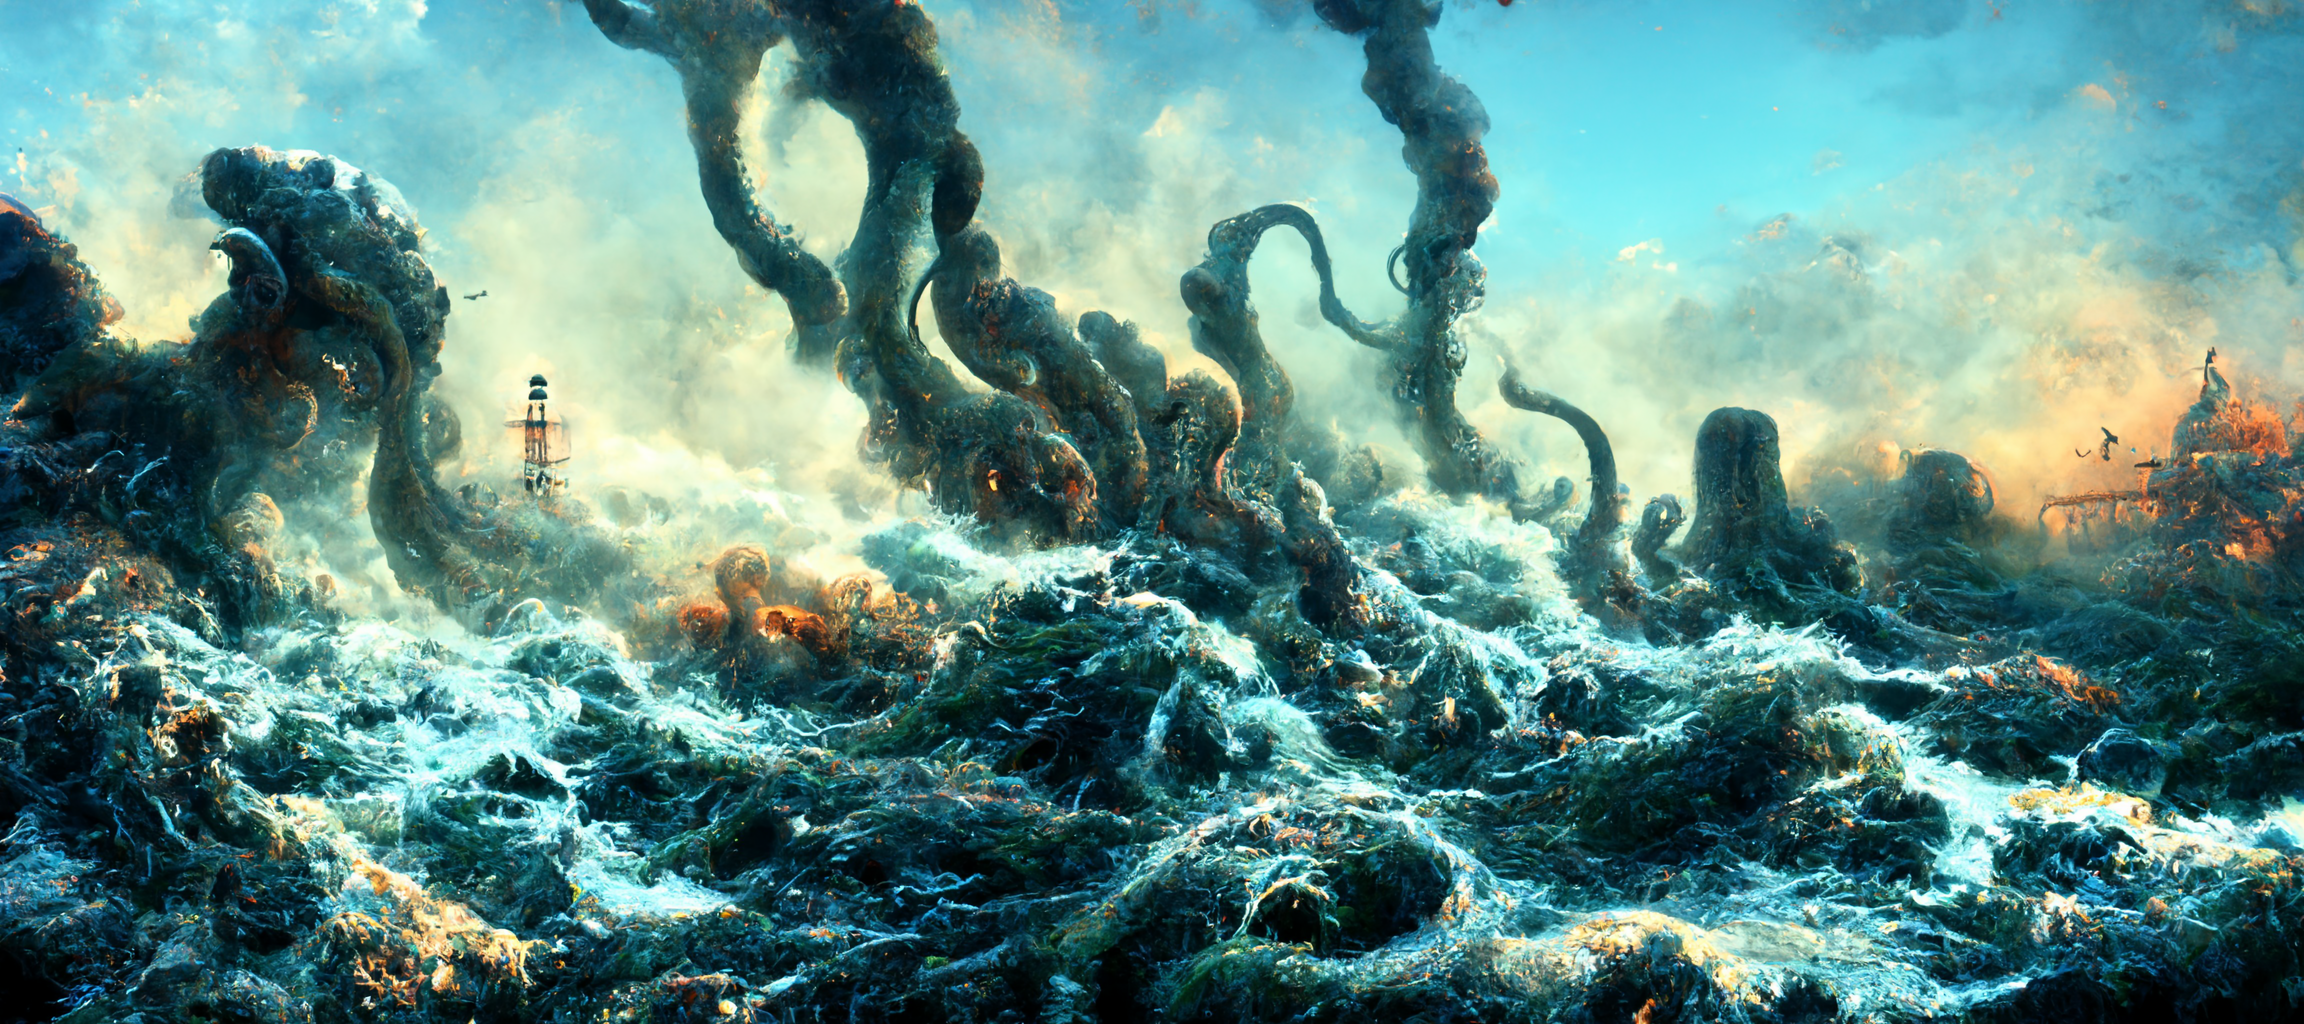 vibe_Maunsell_Forts_being_attacked_by_giant_octopus_giant_tenta_372cdf34-44ff-44c6-a286-95f03202d748